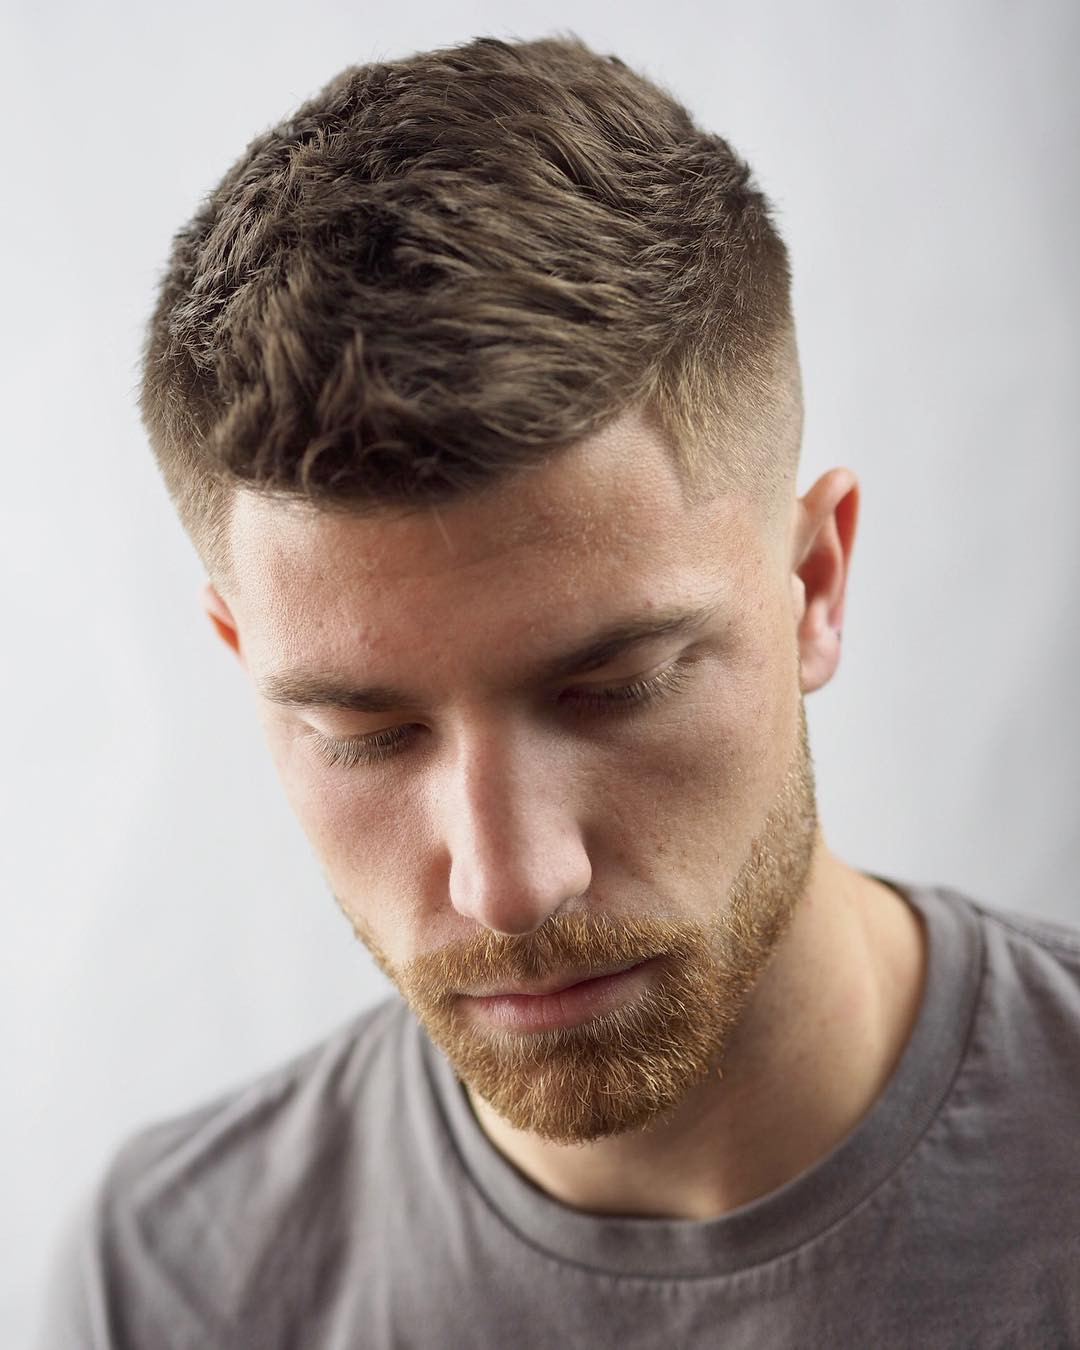 Short Hairstyles Men 2020
 27 Short Haircuts For Men 2020 Styles